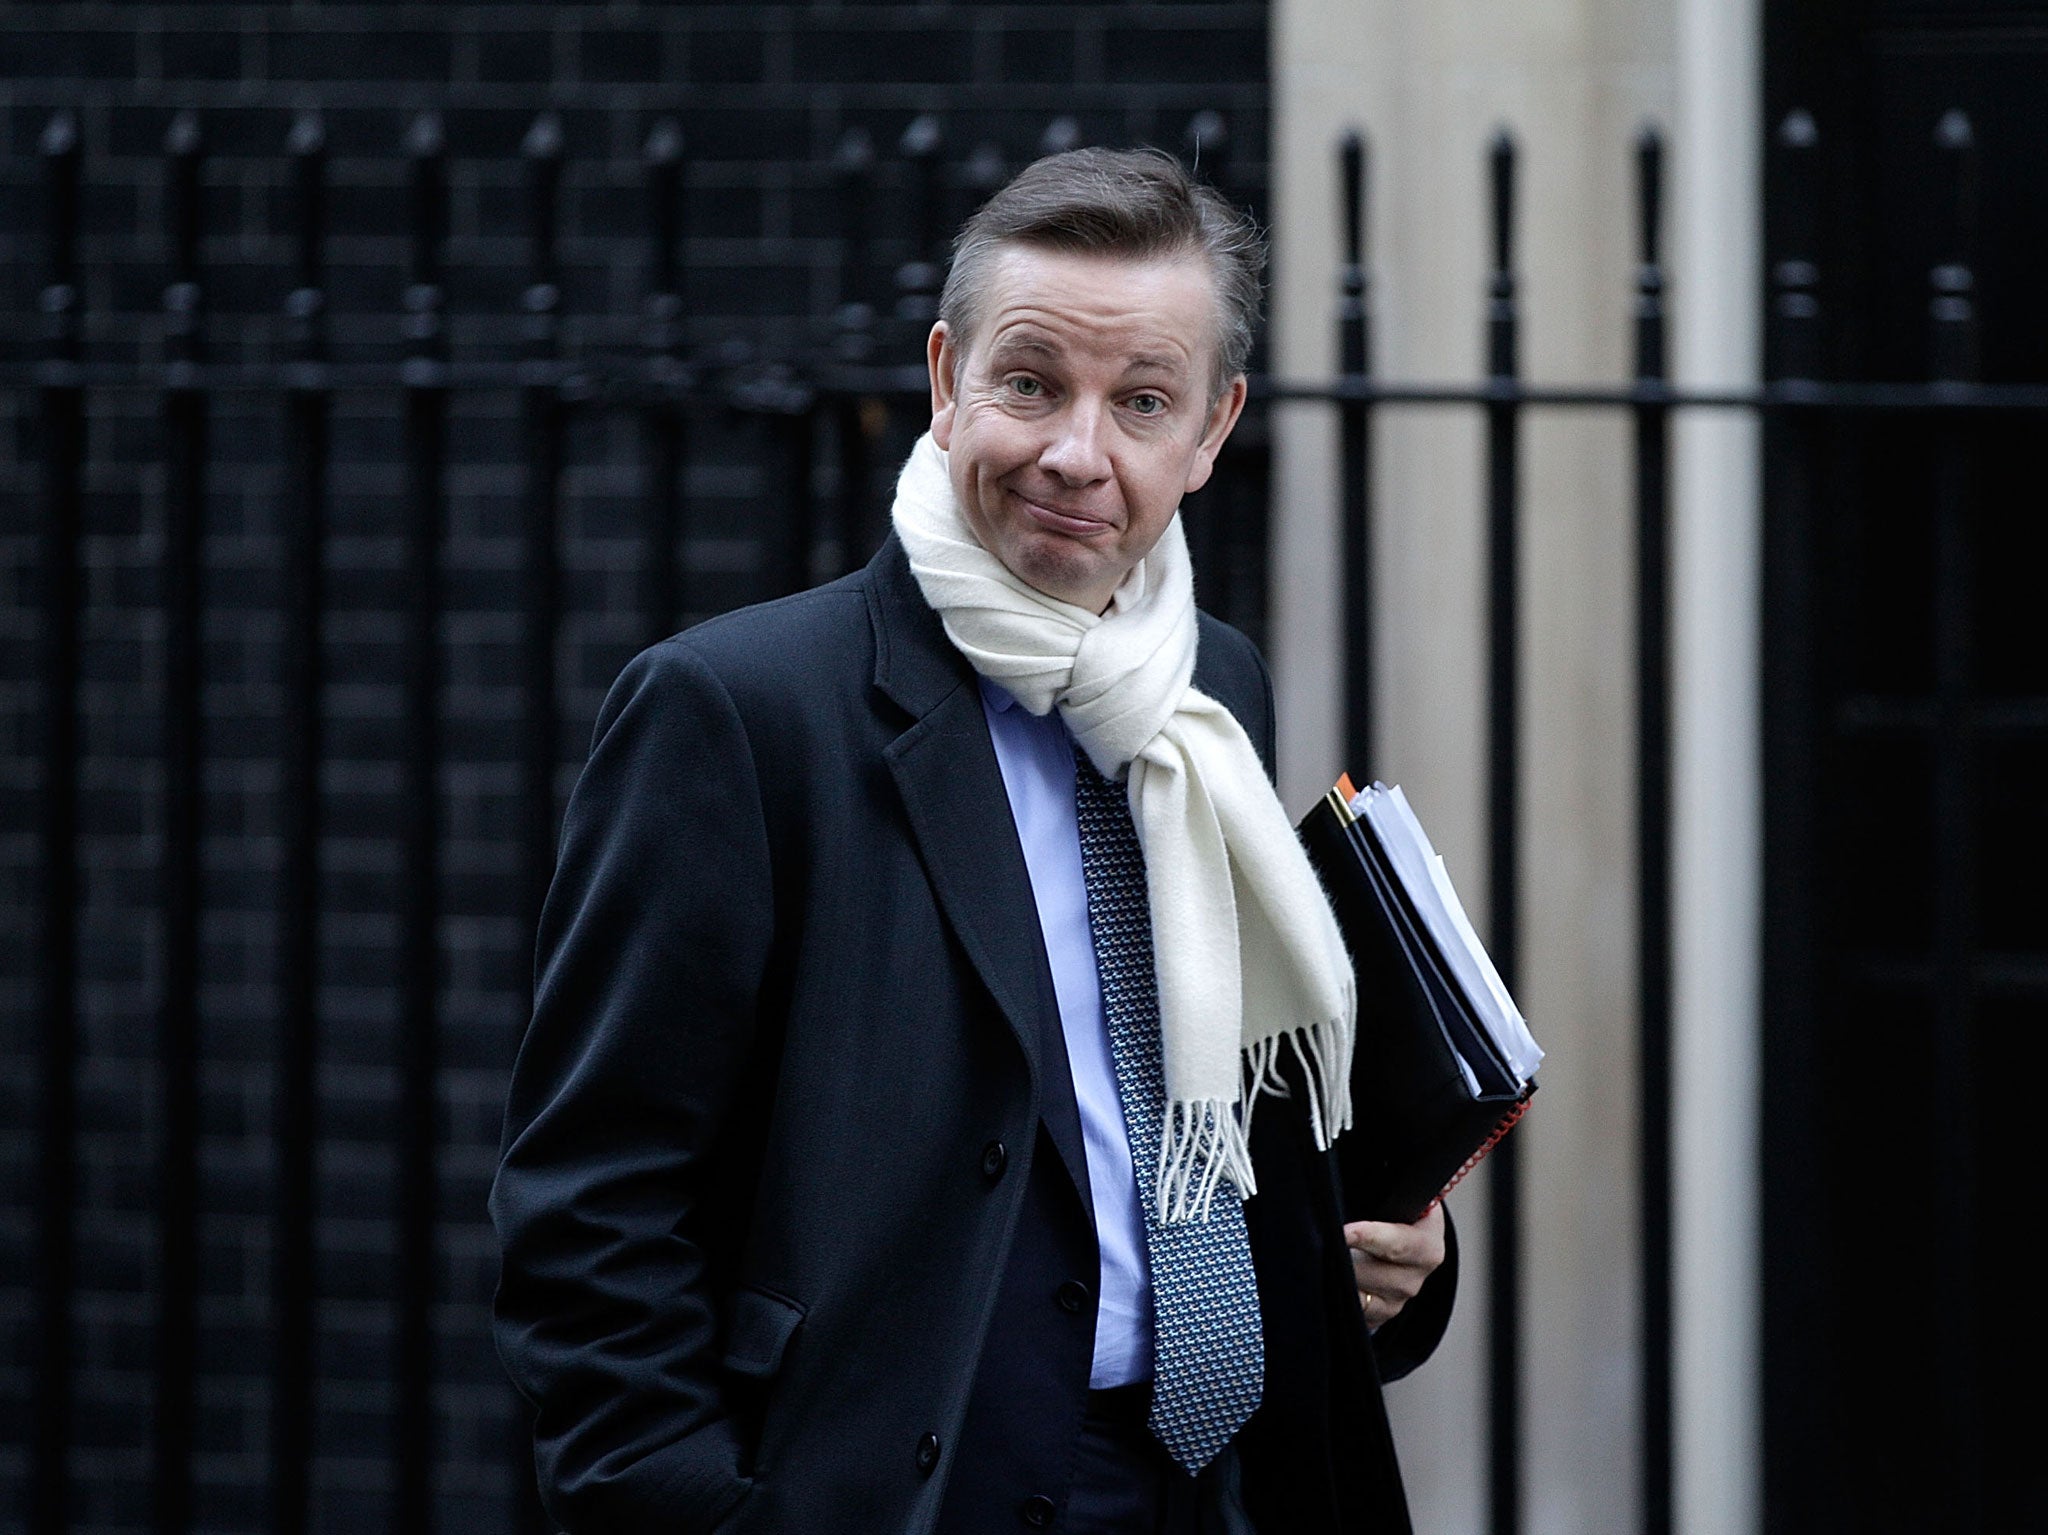 Education Secretary Michael Gove arrives for a cabinet meeting in Downing Street on December 9, 2010 in London, England.